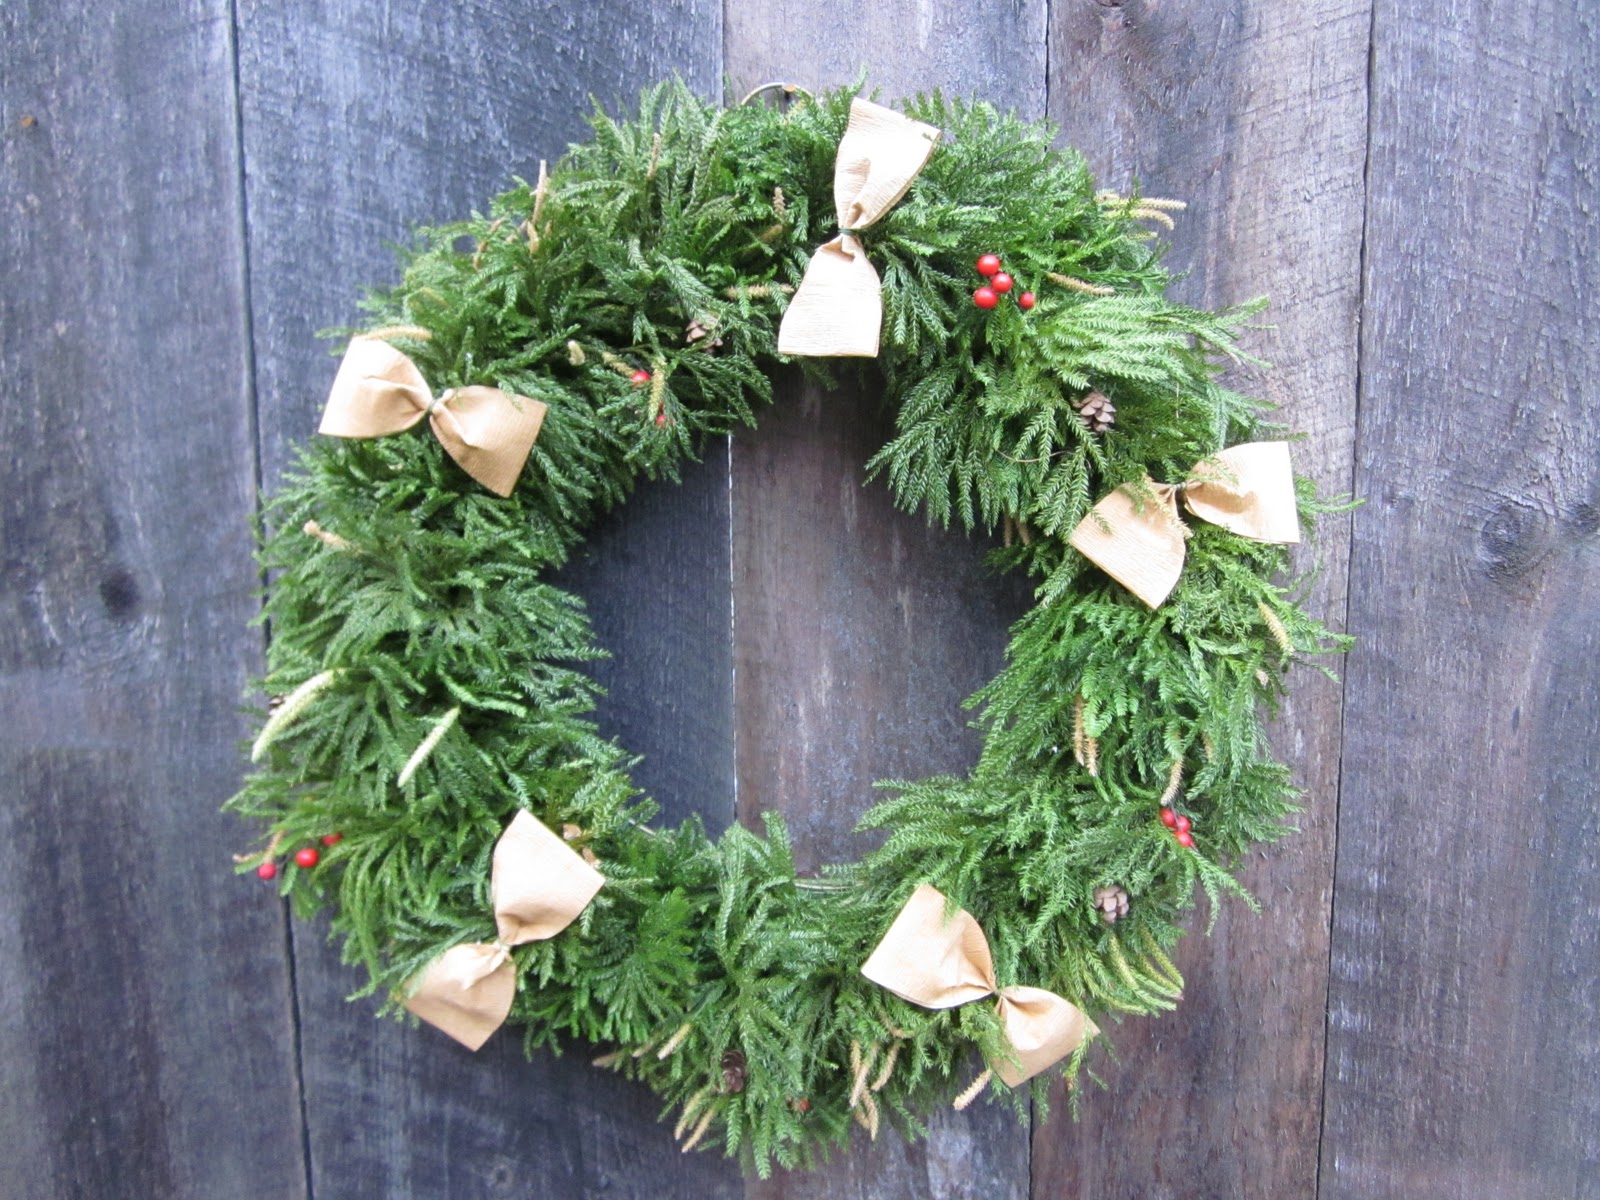 CHESTNUT HILL vintage and design: My First Princess Pine Wreath